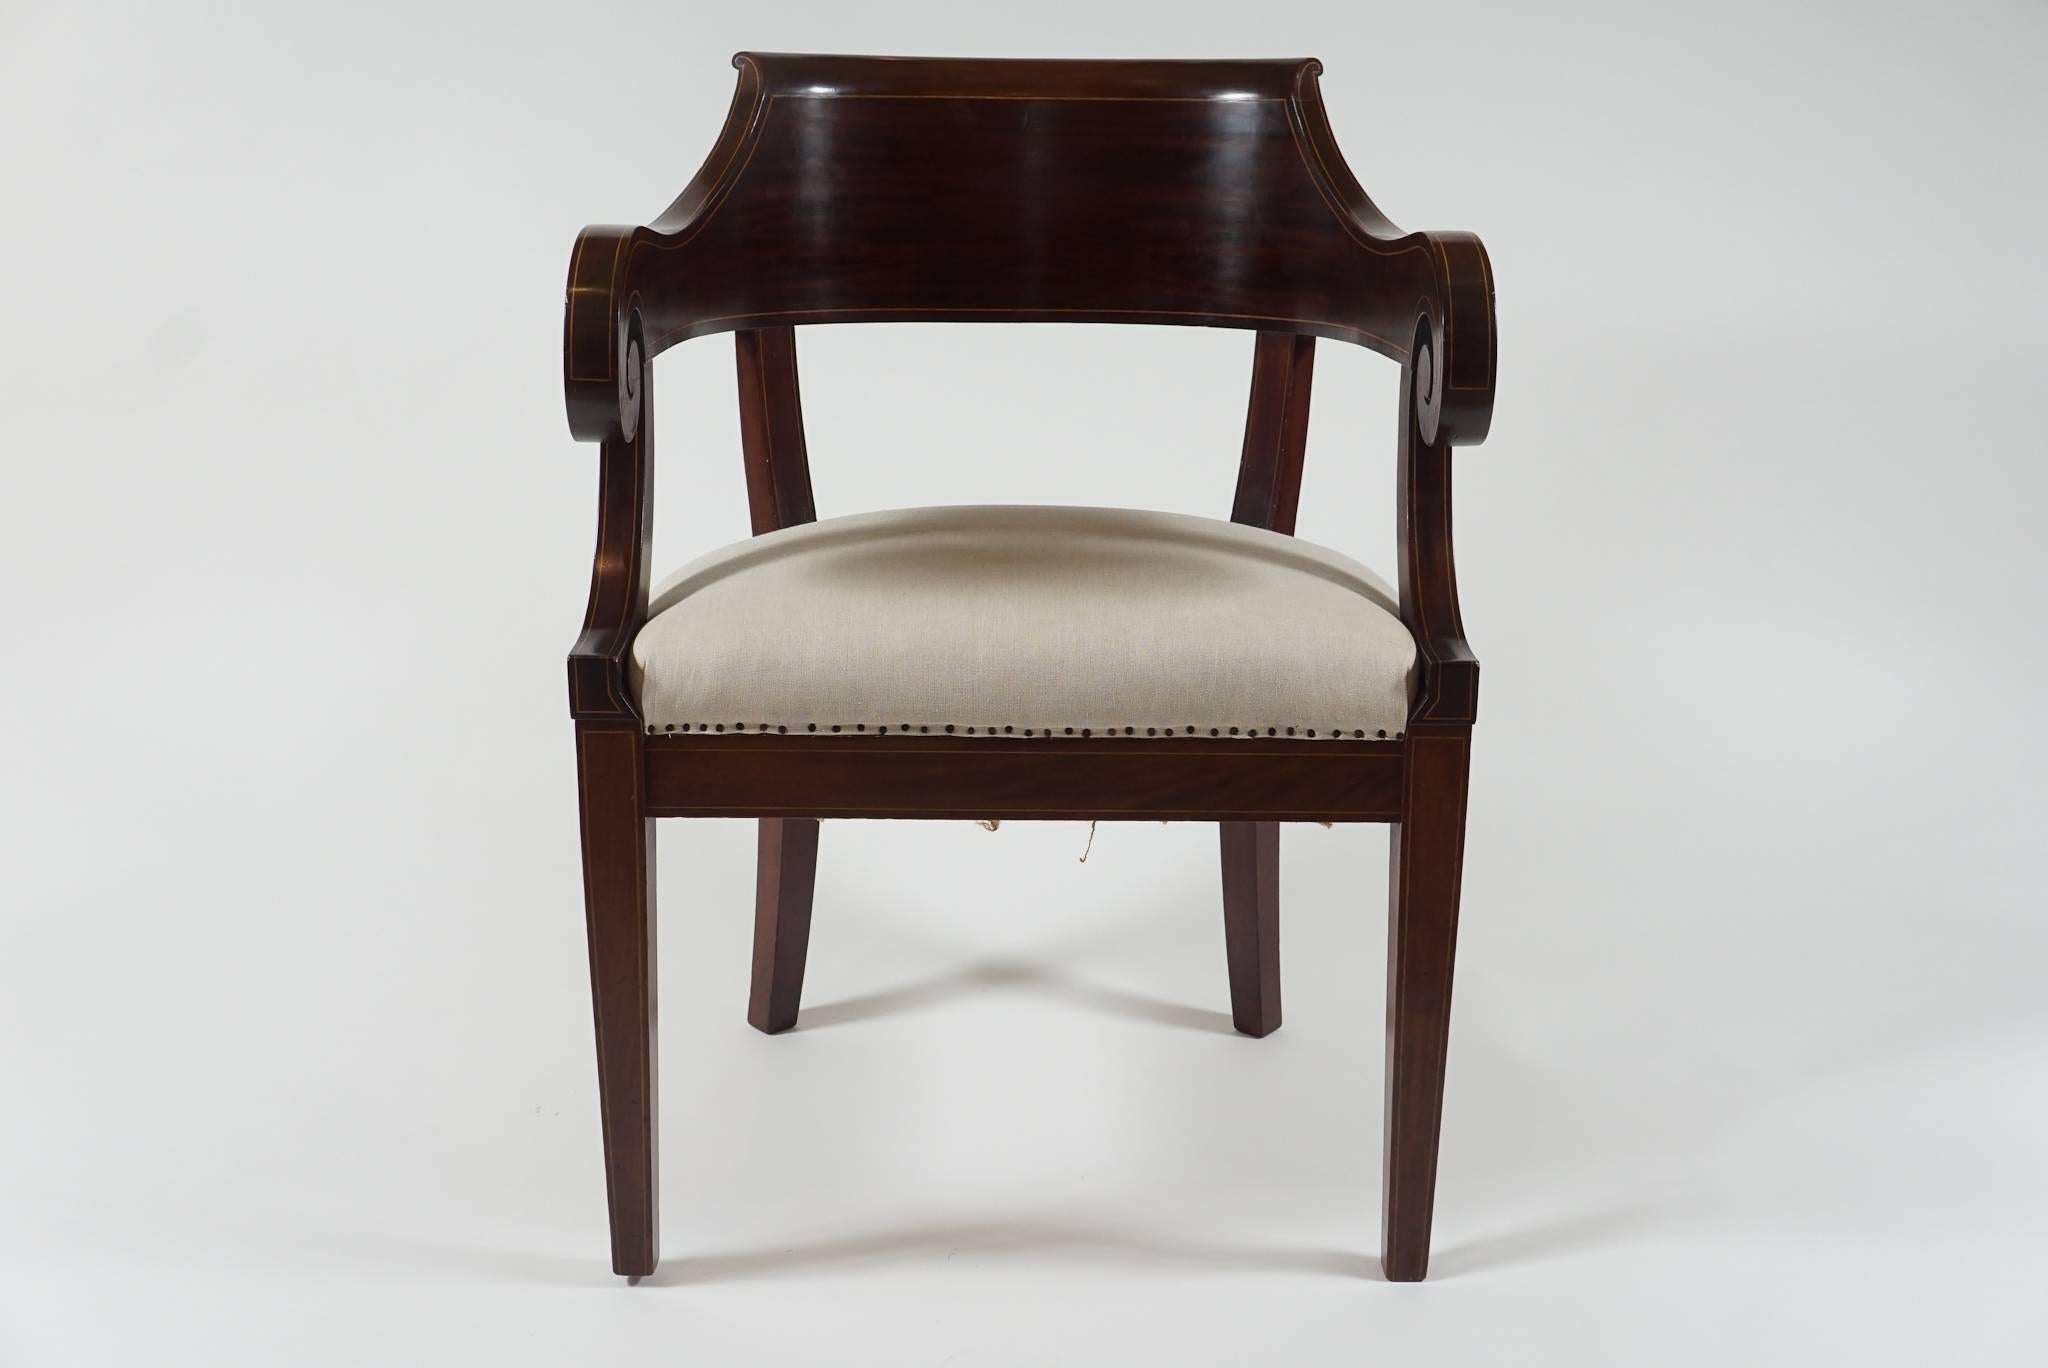 A prime example of the American Classical style.
This mahogany armchair has detailed inlay and old form.